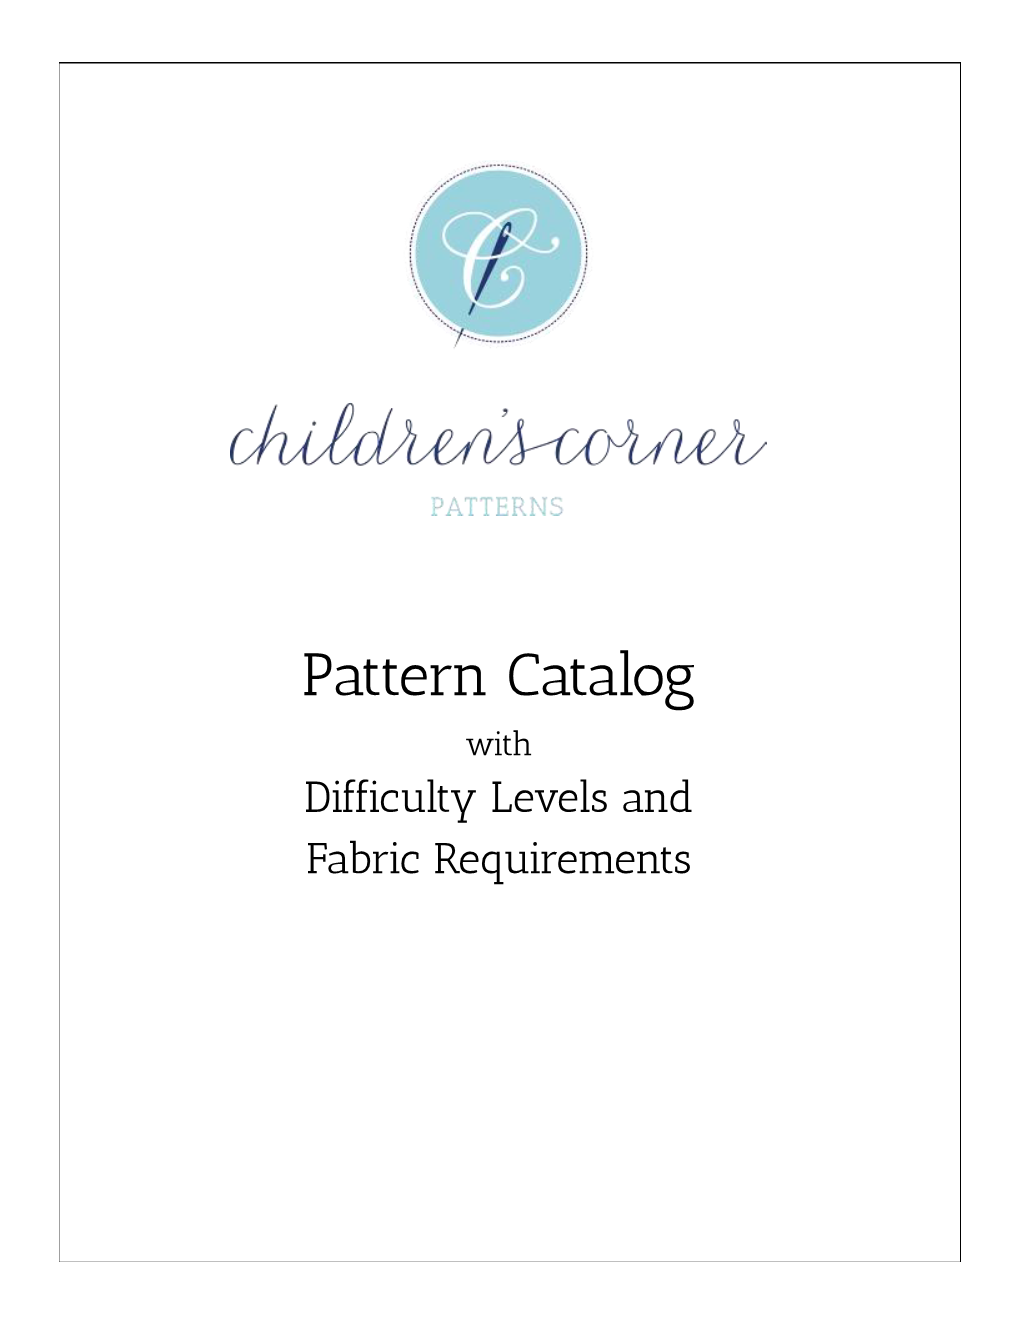 Pattern Catalog with Difficulty Levels and Fabric Requirements